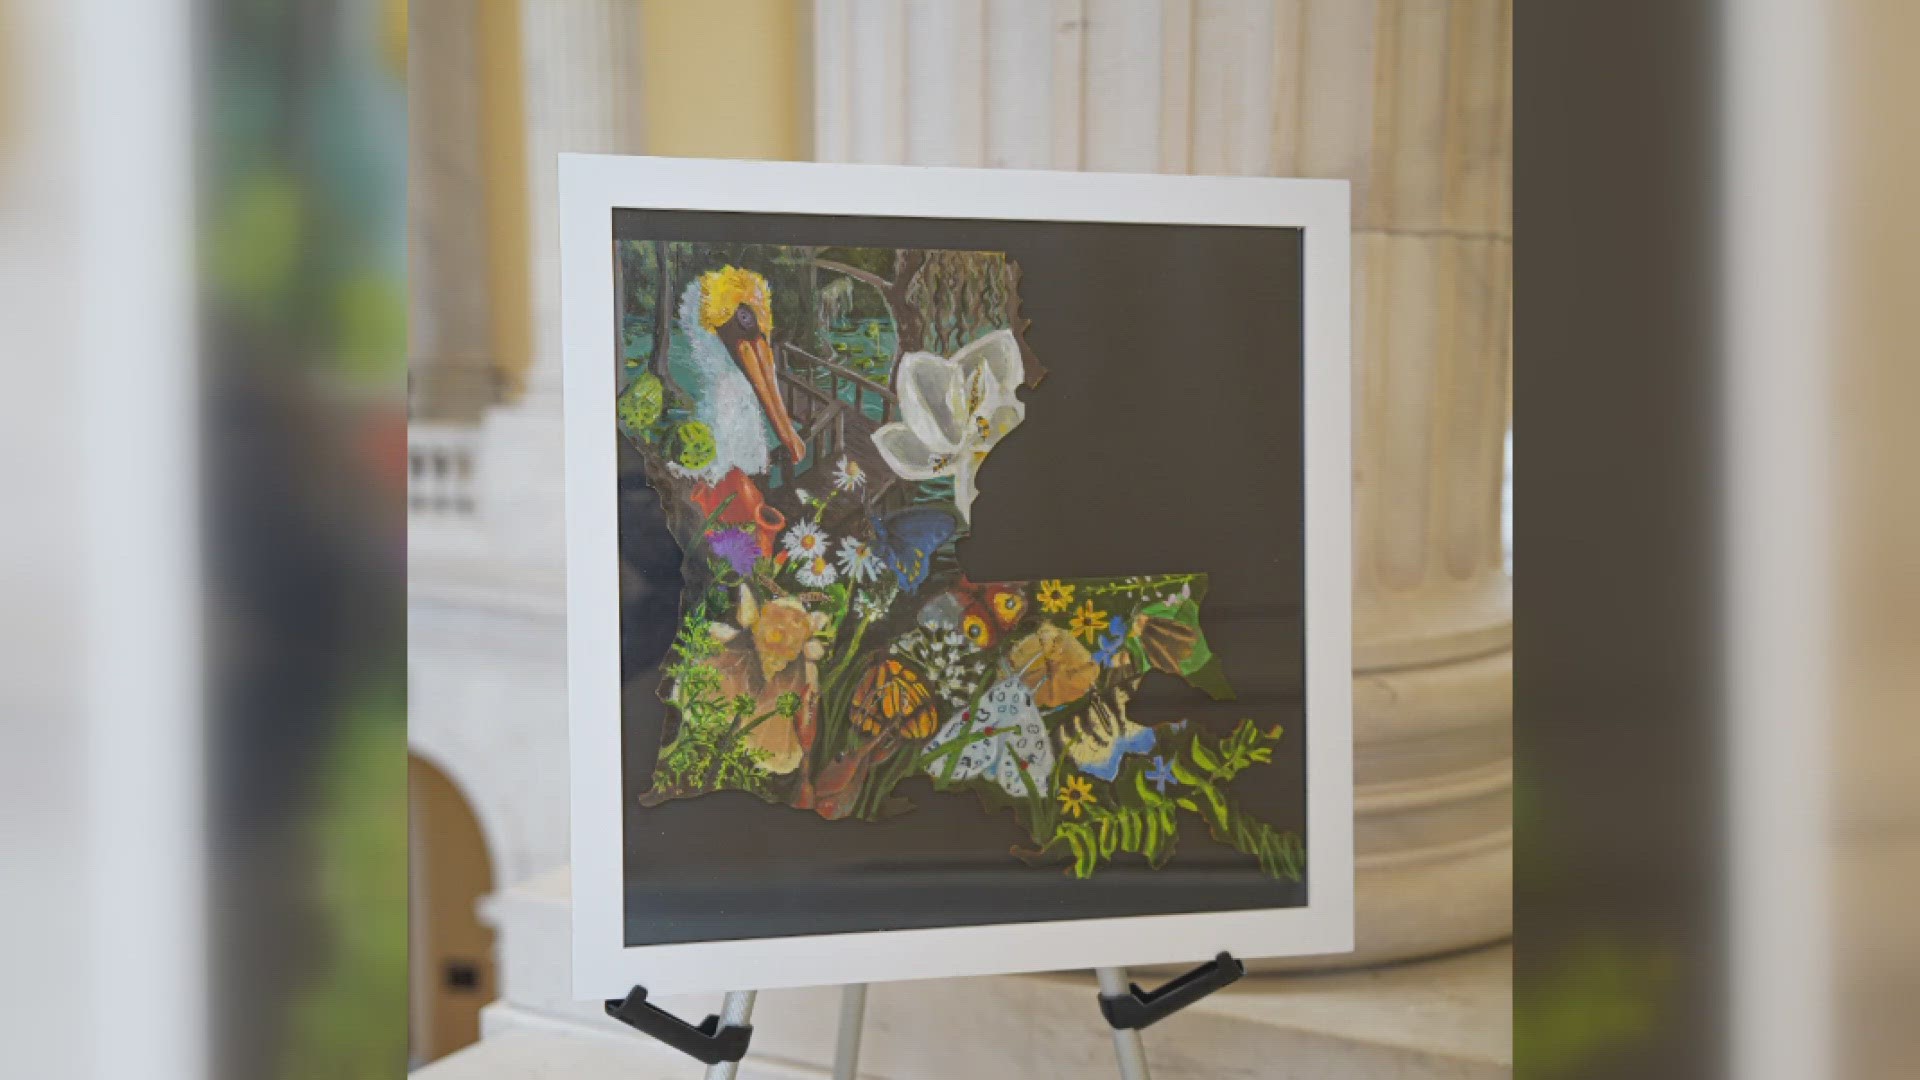 JyLynne Hamberger, a freshman at Ponchatoula High School, won the 2023 Congressional Art Competition for Louisiana's 1st district.